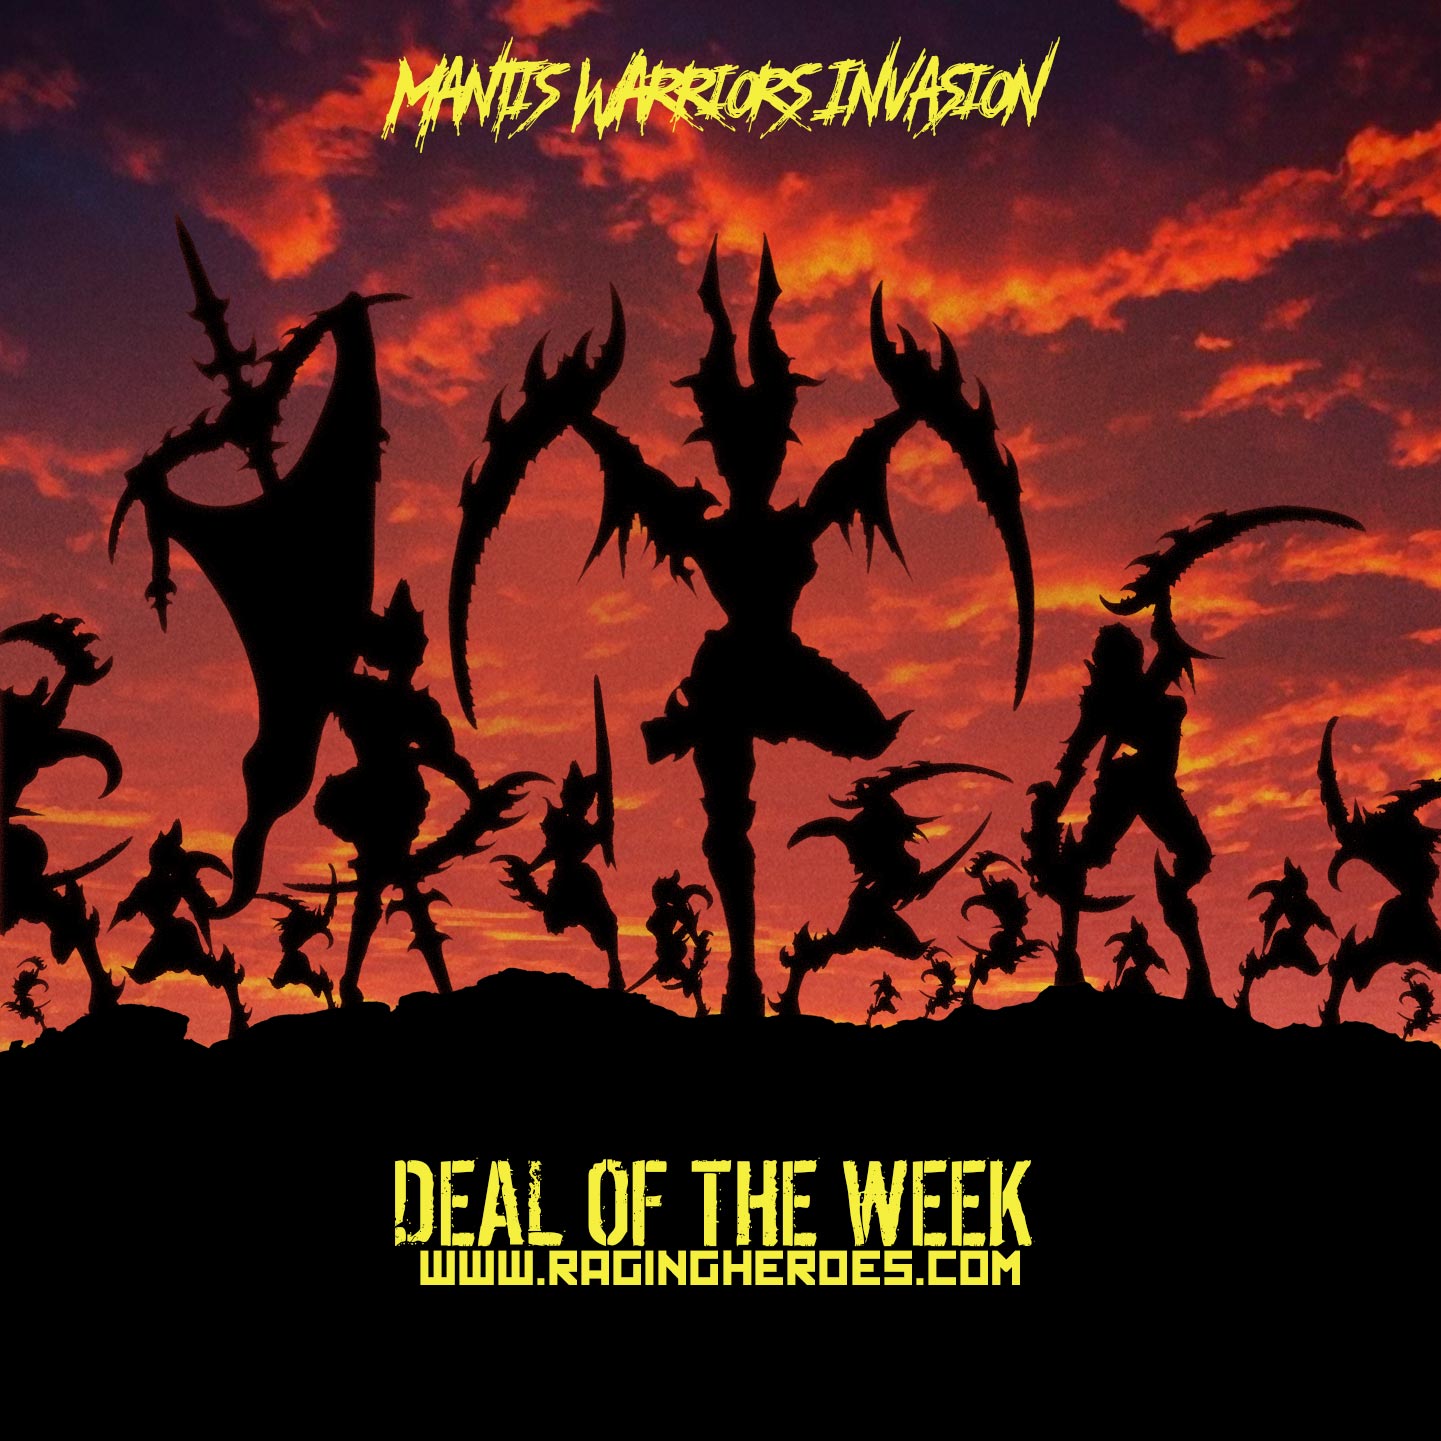 Deal of the Week: Mantis Invasion!